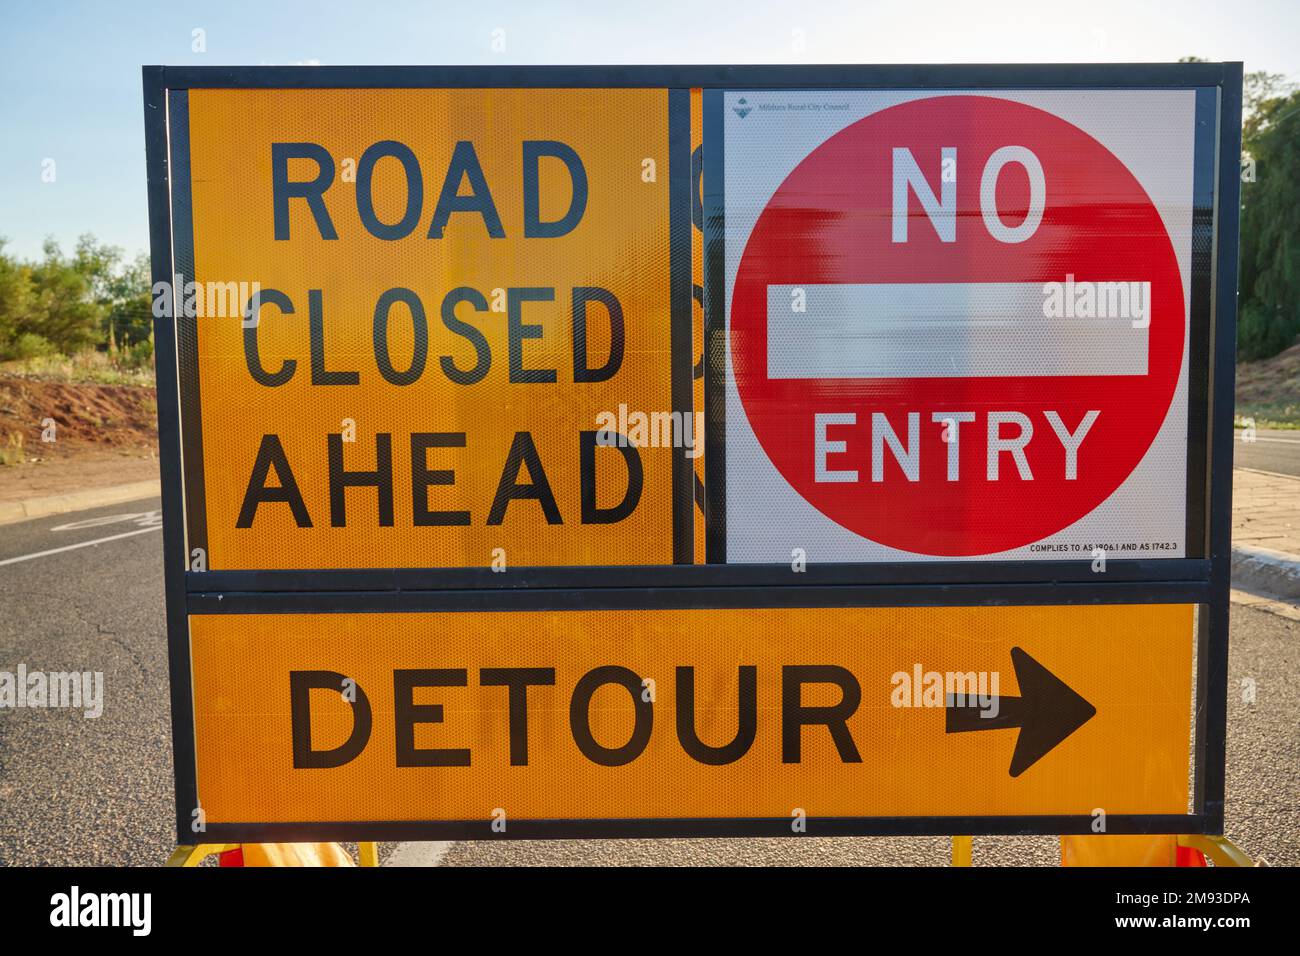 Road CLOSED, No Entry and Detour signs on Ranfurly Way, Merbein, Victoria, Australia. Foto Stock